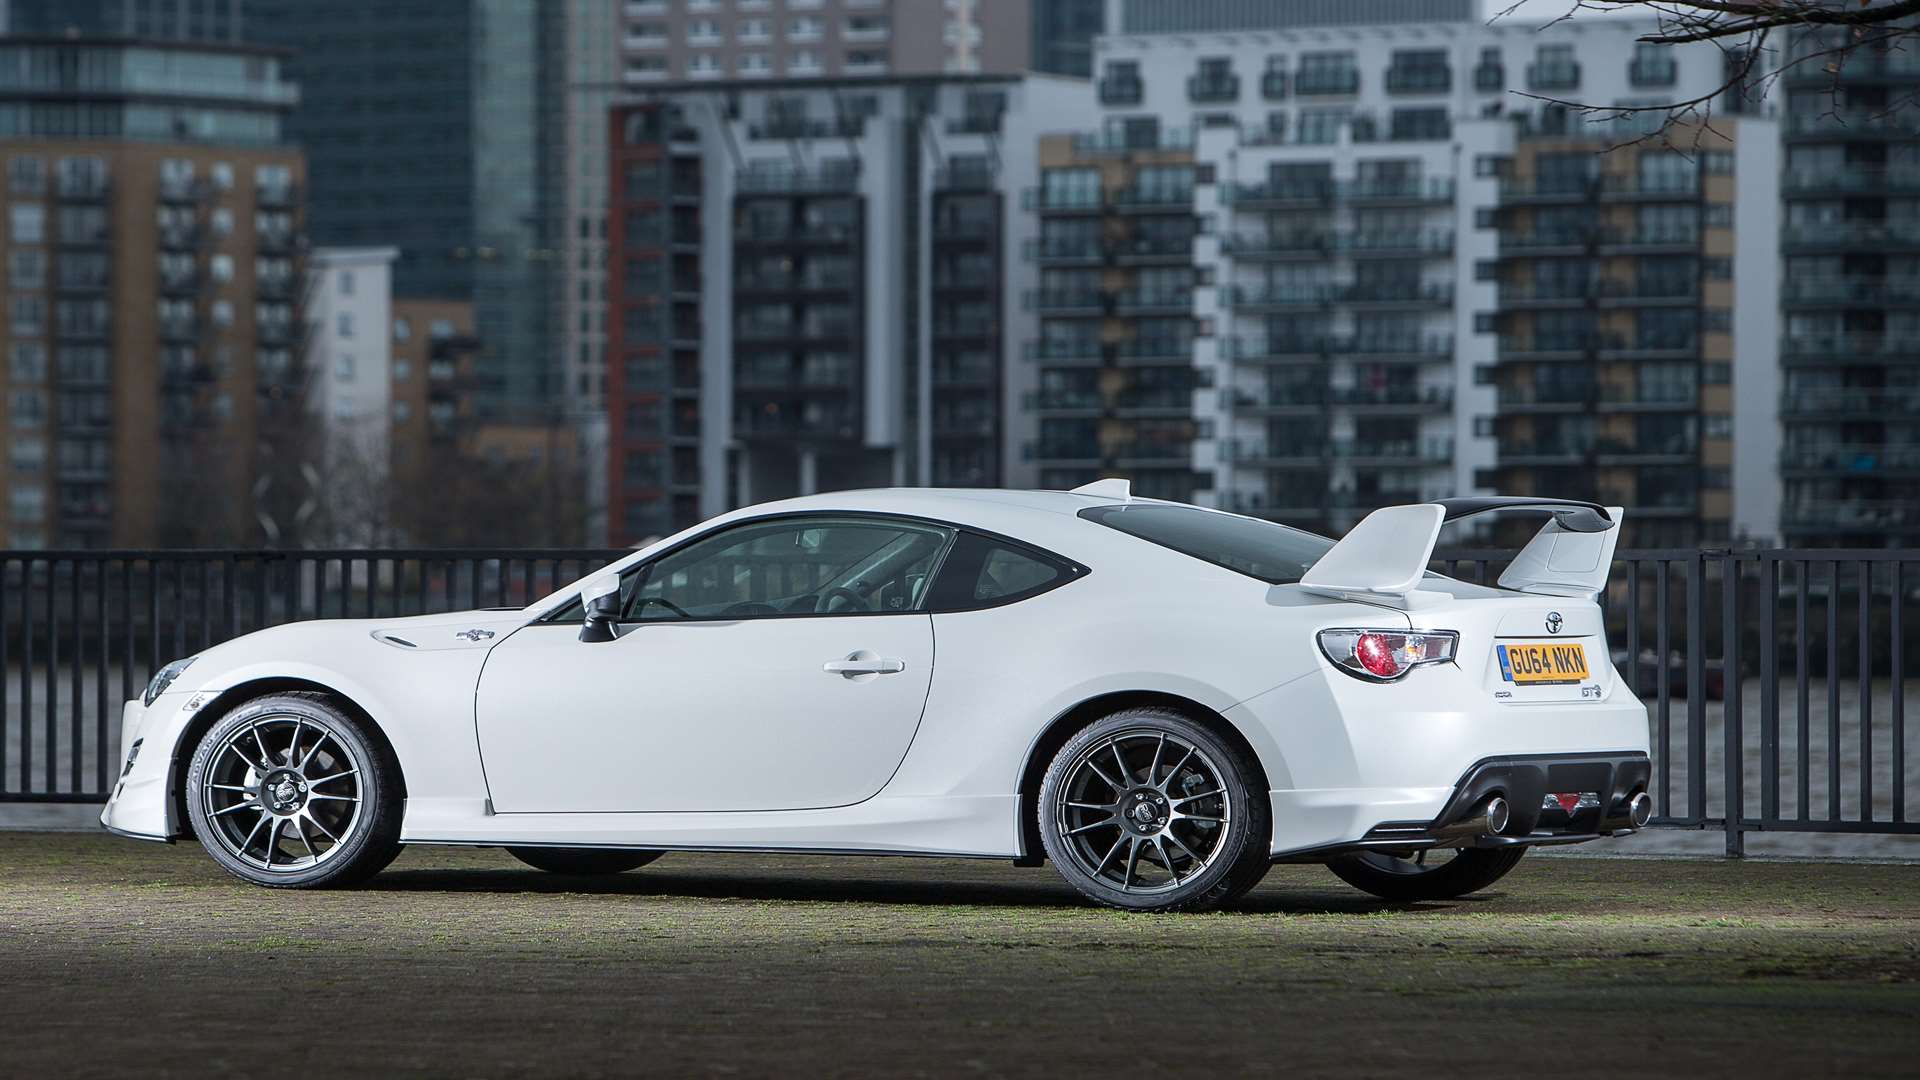 There's no doubting the GT86's intent